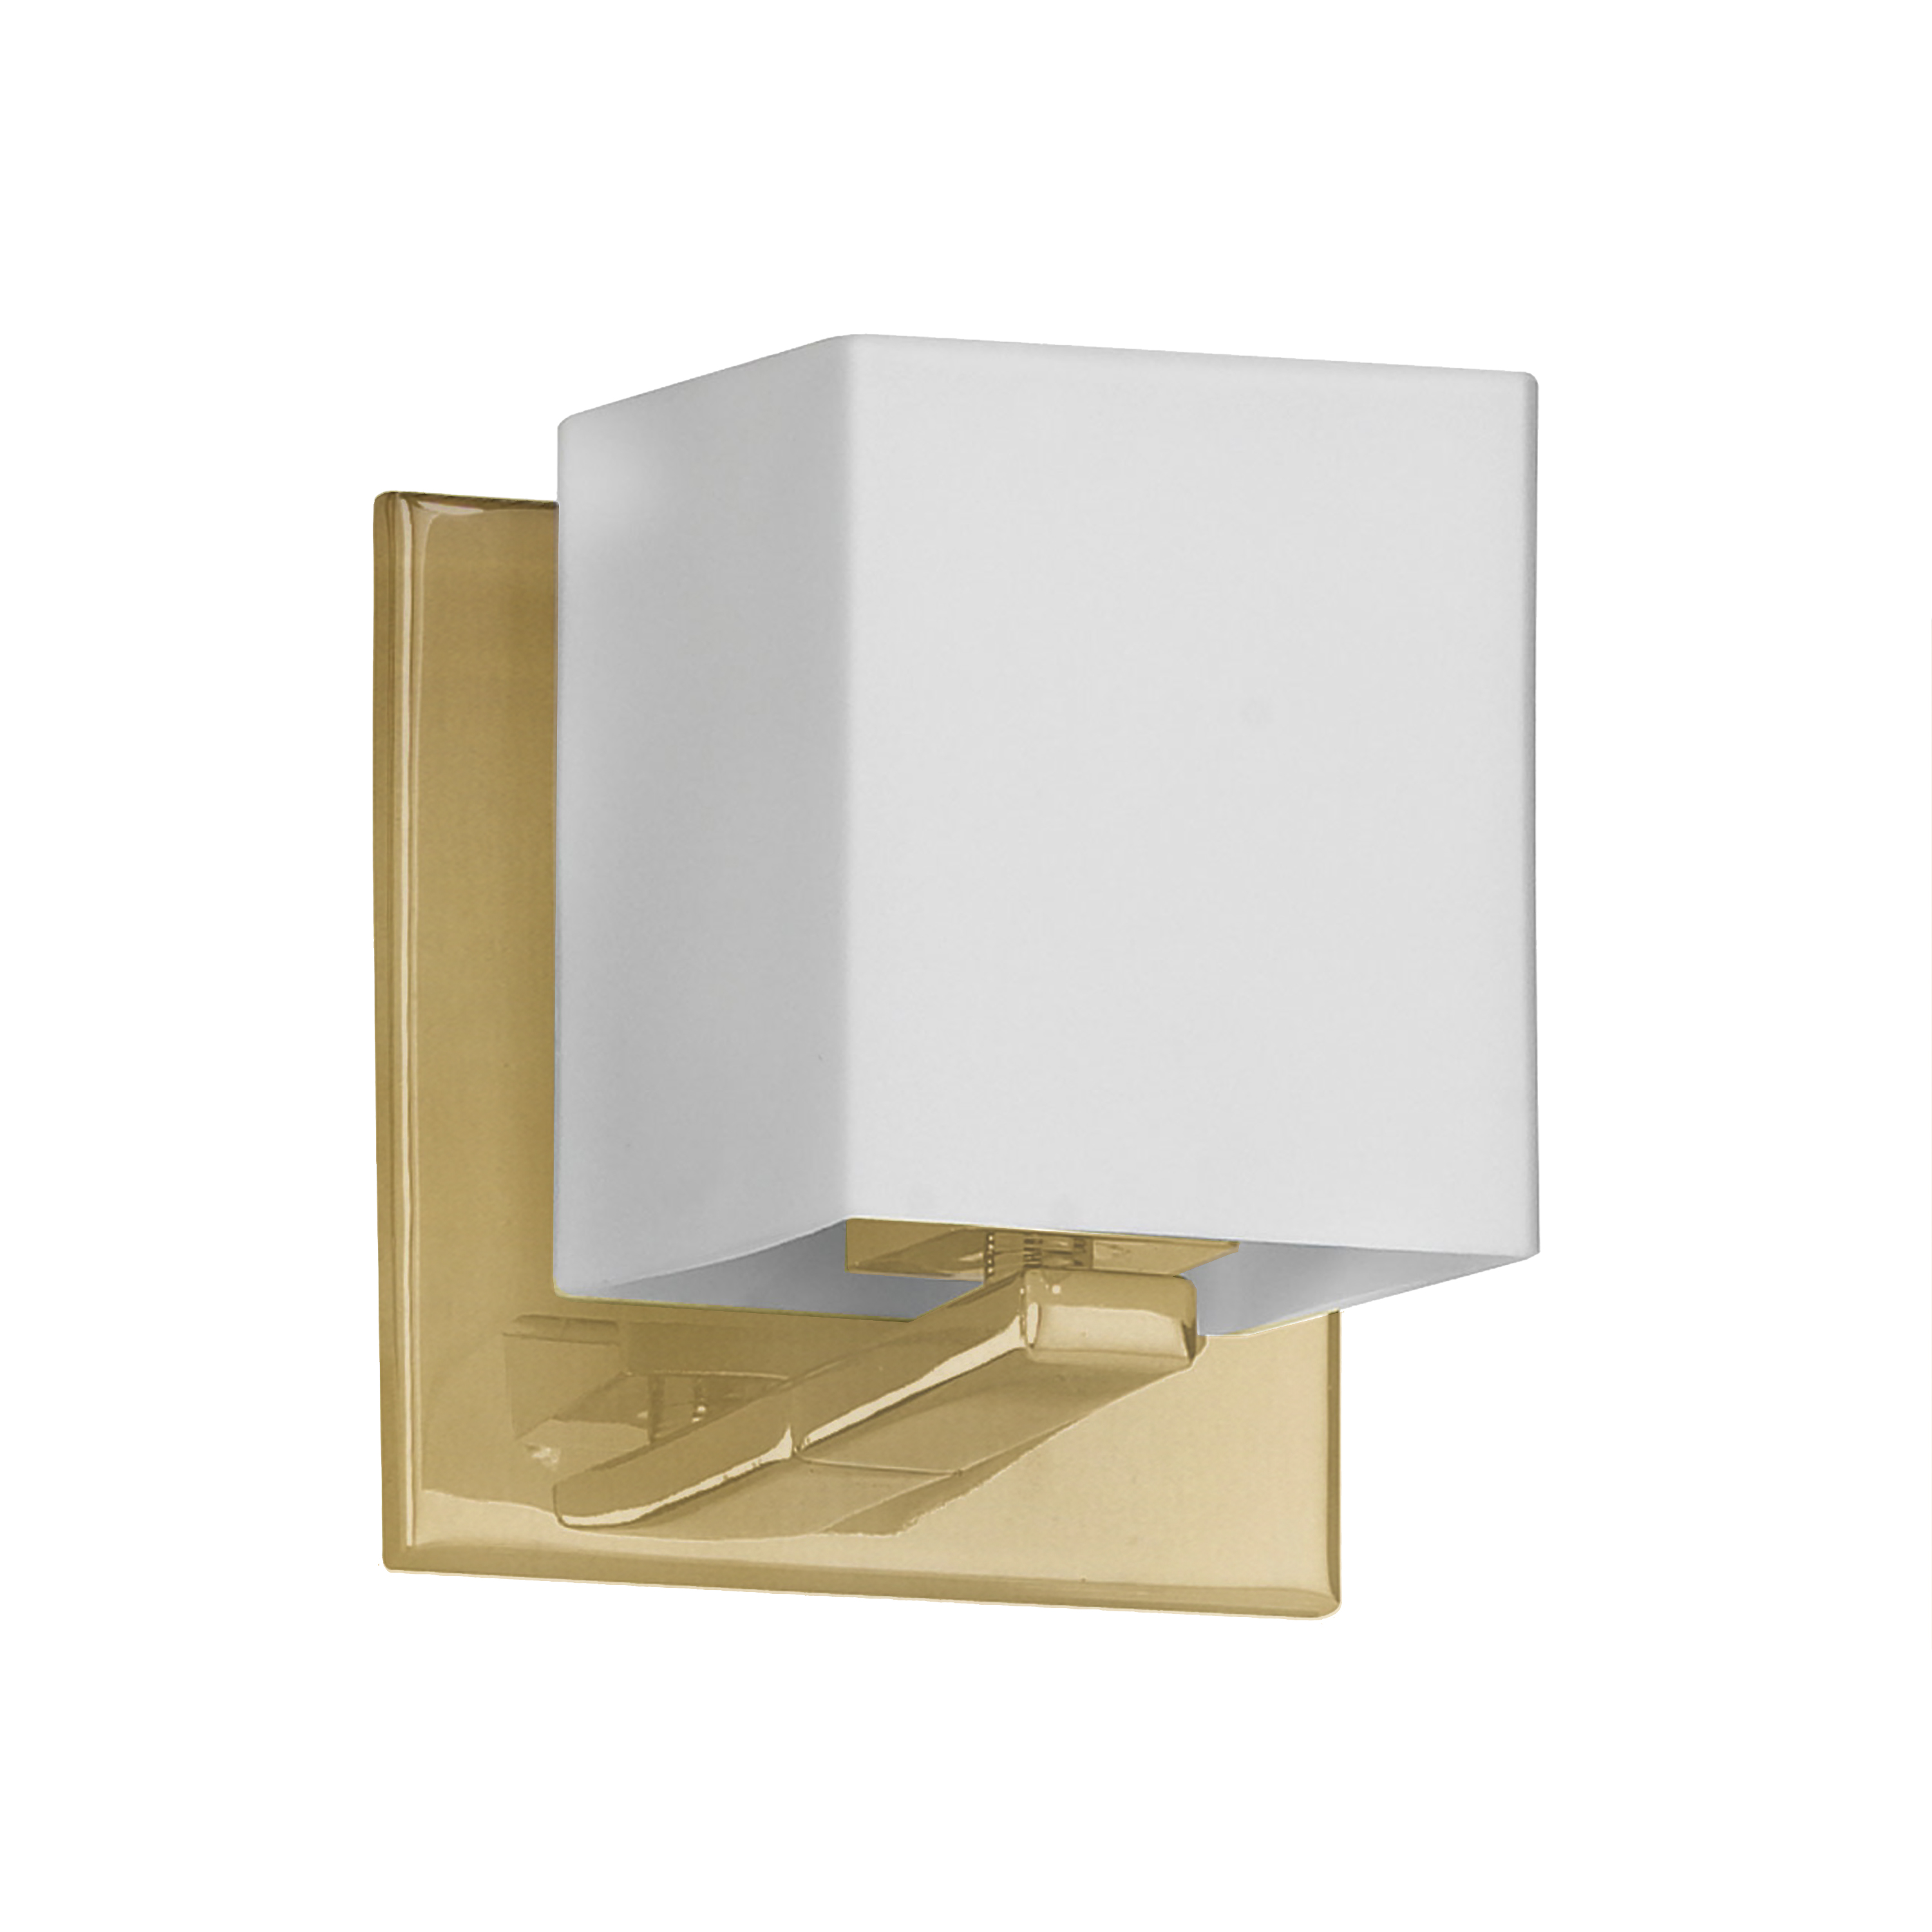 1 Light Halogen Wall Sconce, Aged Brass with White Glass